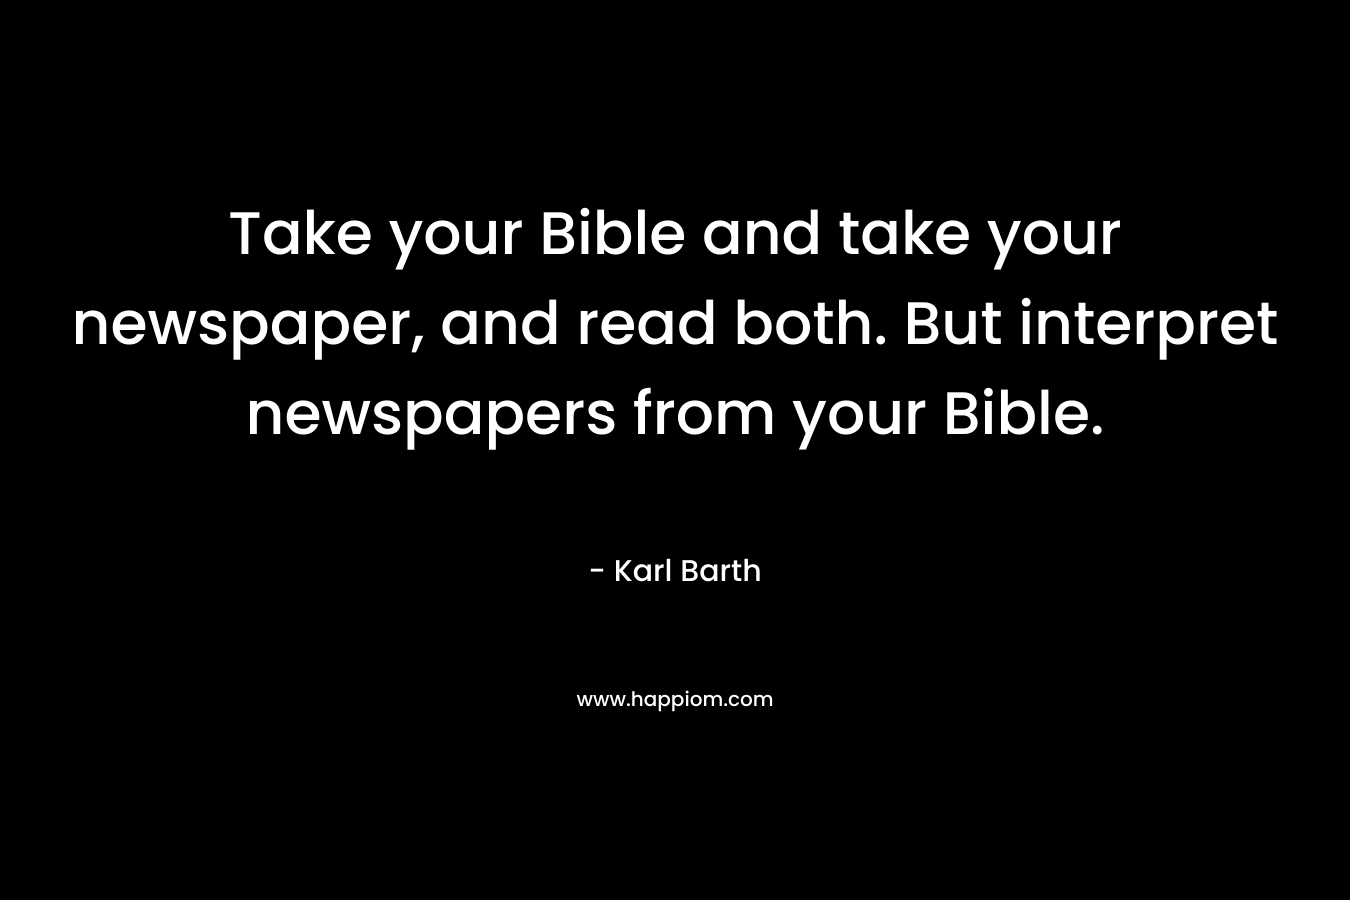 Take your Bible and take your newspaper, and read both. But interpret newspapers from your Bible. – Karl Barth